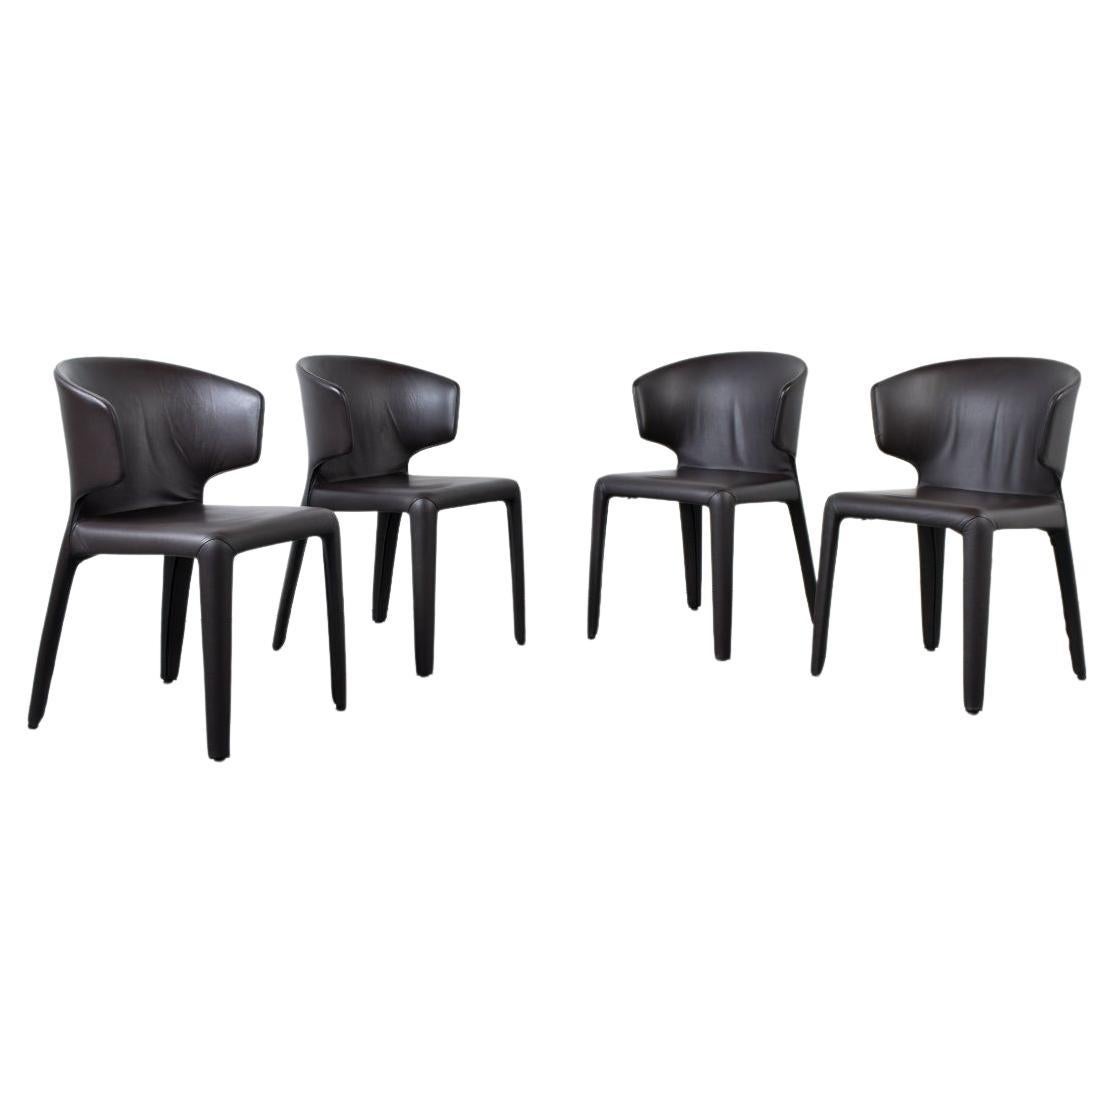 Cassina Hola 367 dining chairs by Hannes Wettstein For Sale